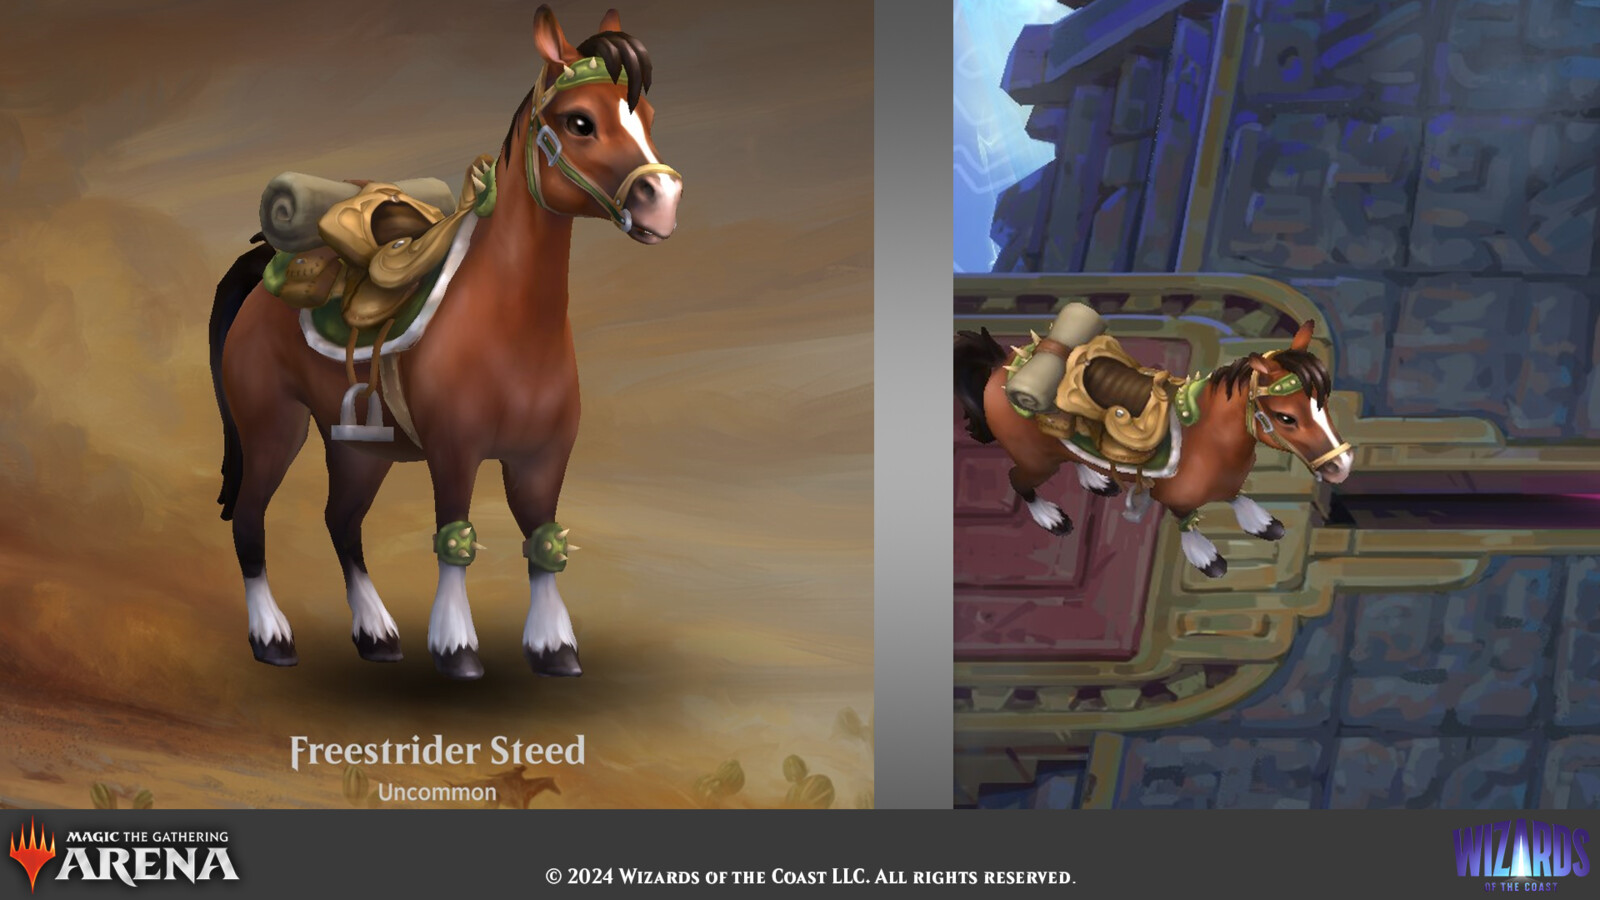 Select companion and game views for the Freestrider Steed